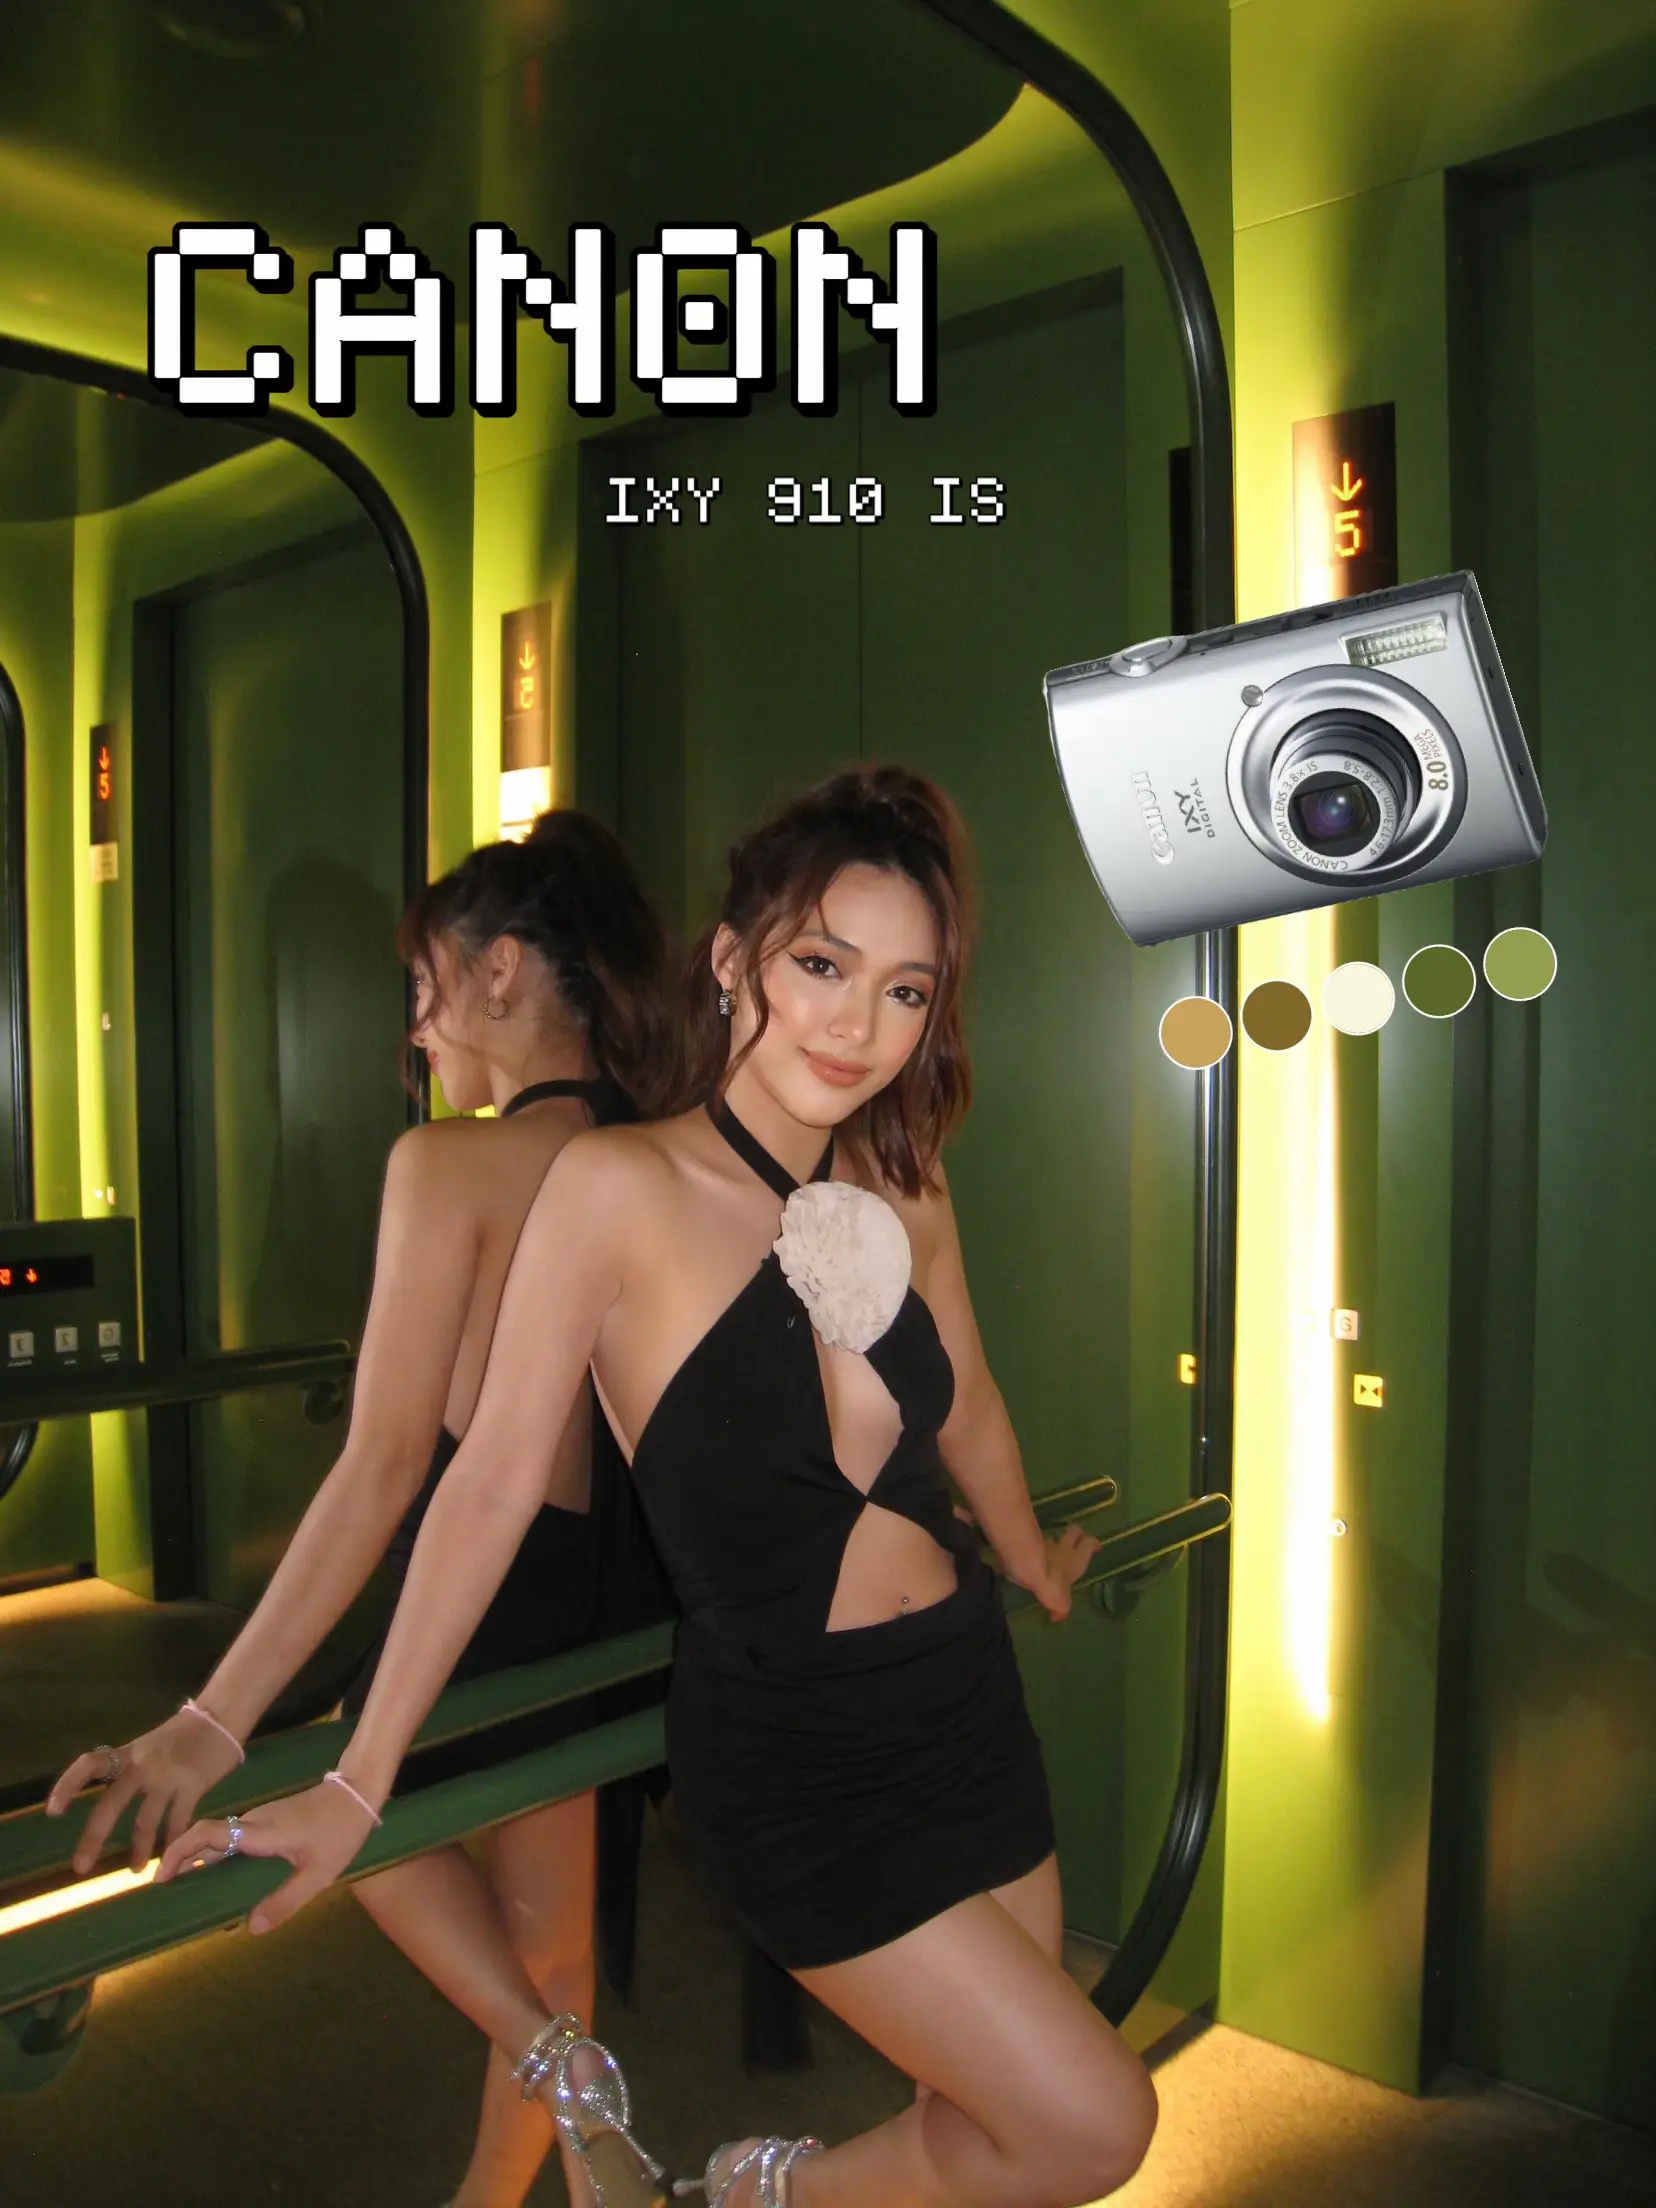 canon ixy digital camera review | Gallery posted by Ying | Lemon8